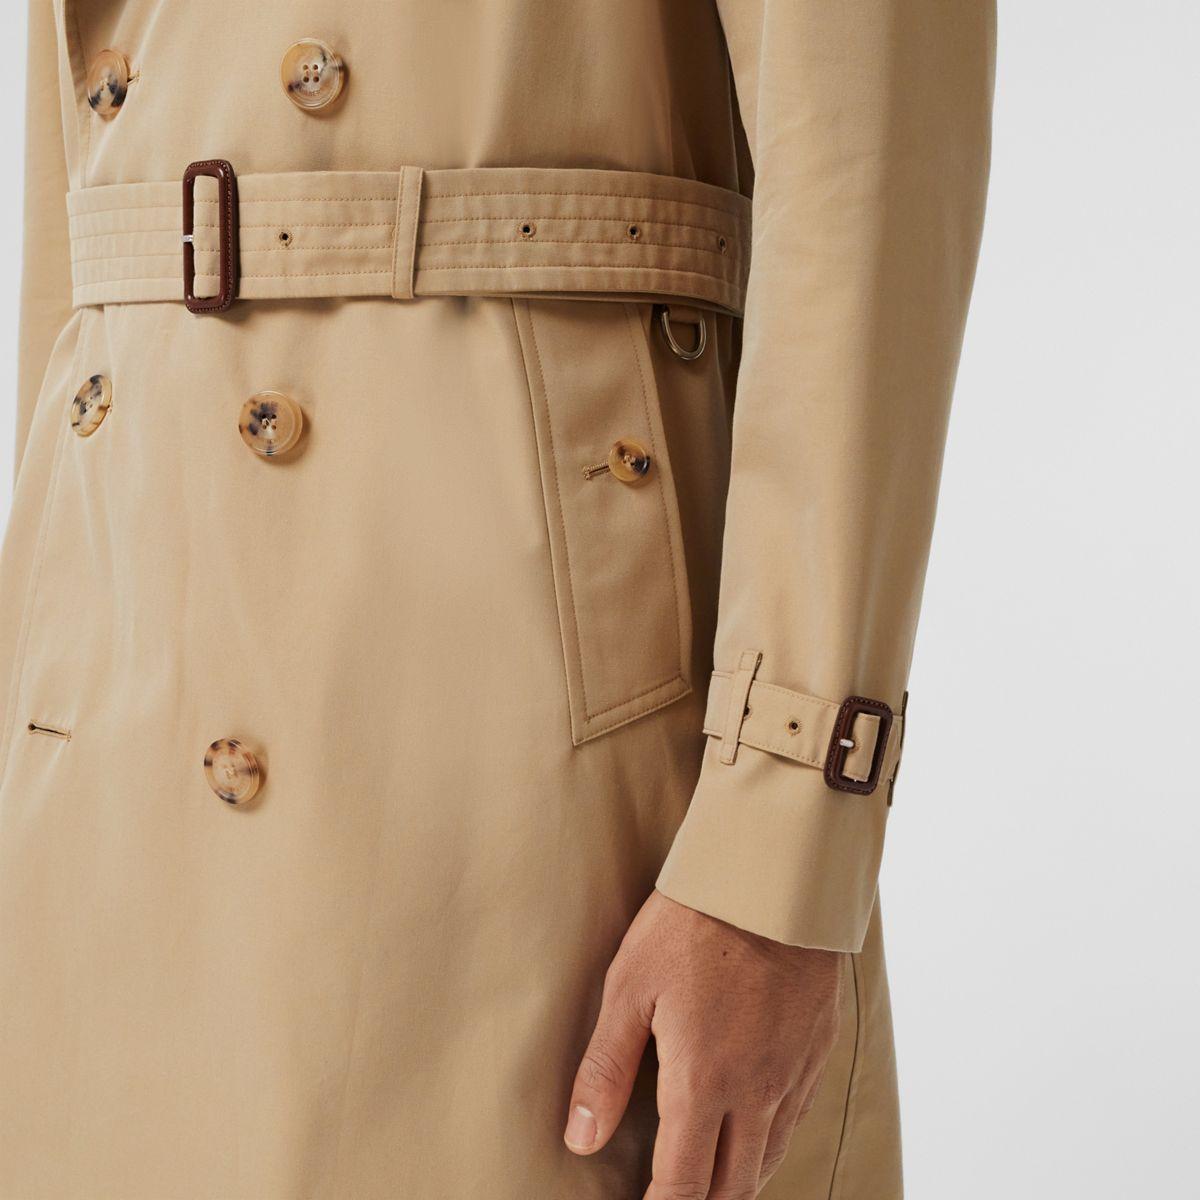 Burberry Cotton The Short Wimbledon Trench Coat in Honey (Natural) for Men  - Save 62% | Lyst